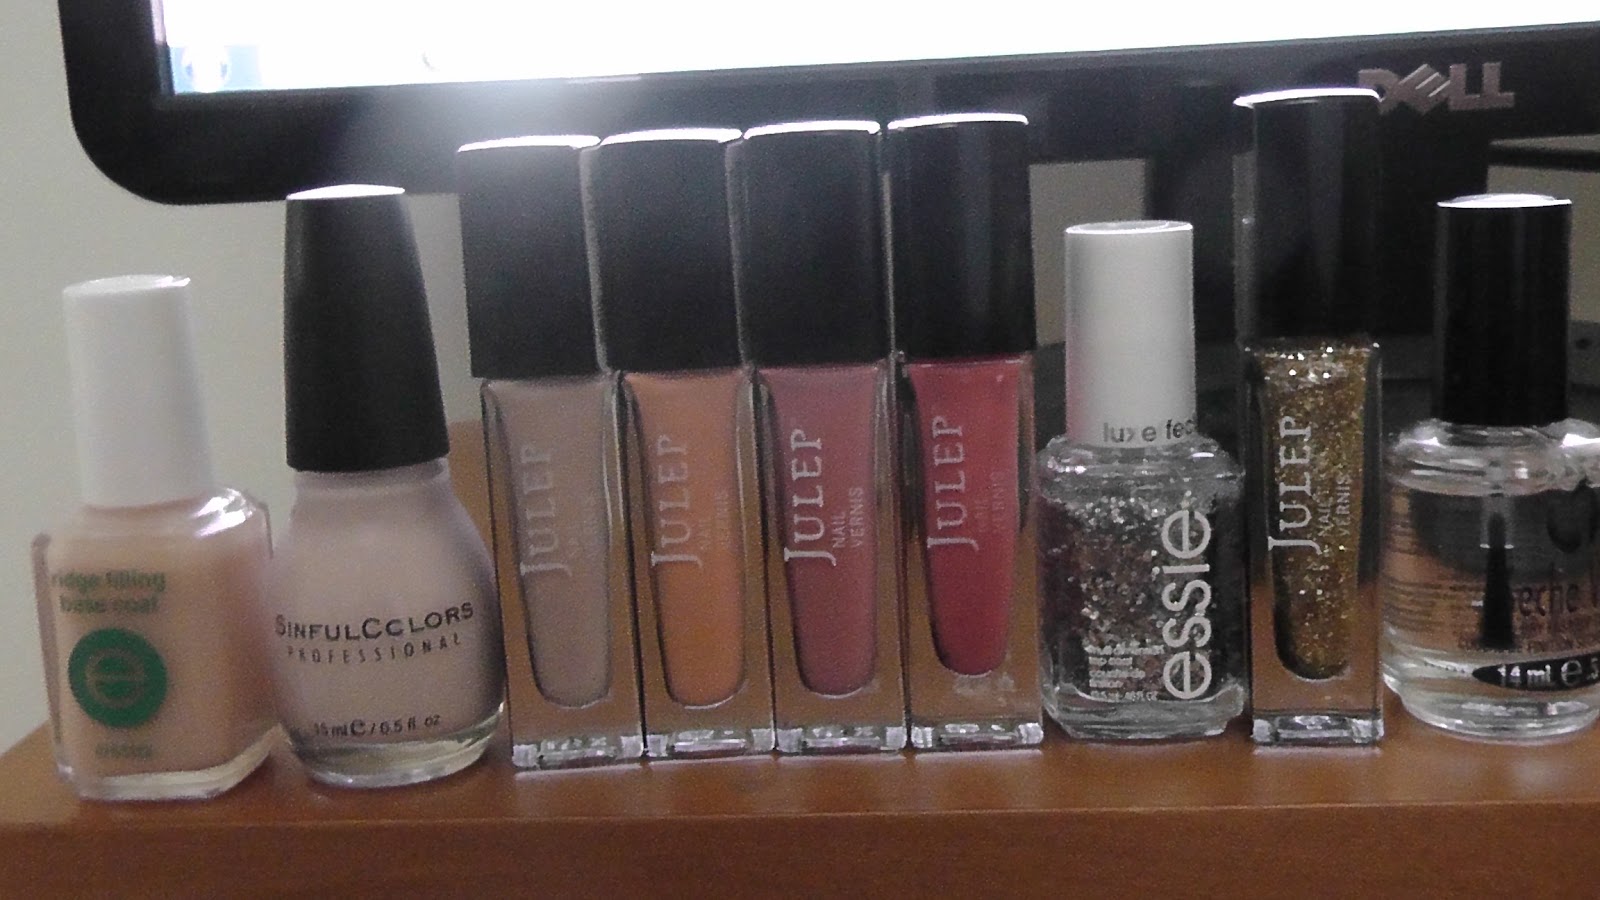 and Sasha, essie luxeffects in Set in Stones, Julep Nail Vernis in Oscar,